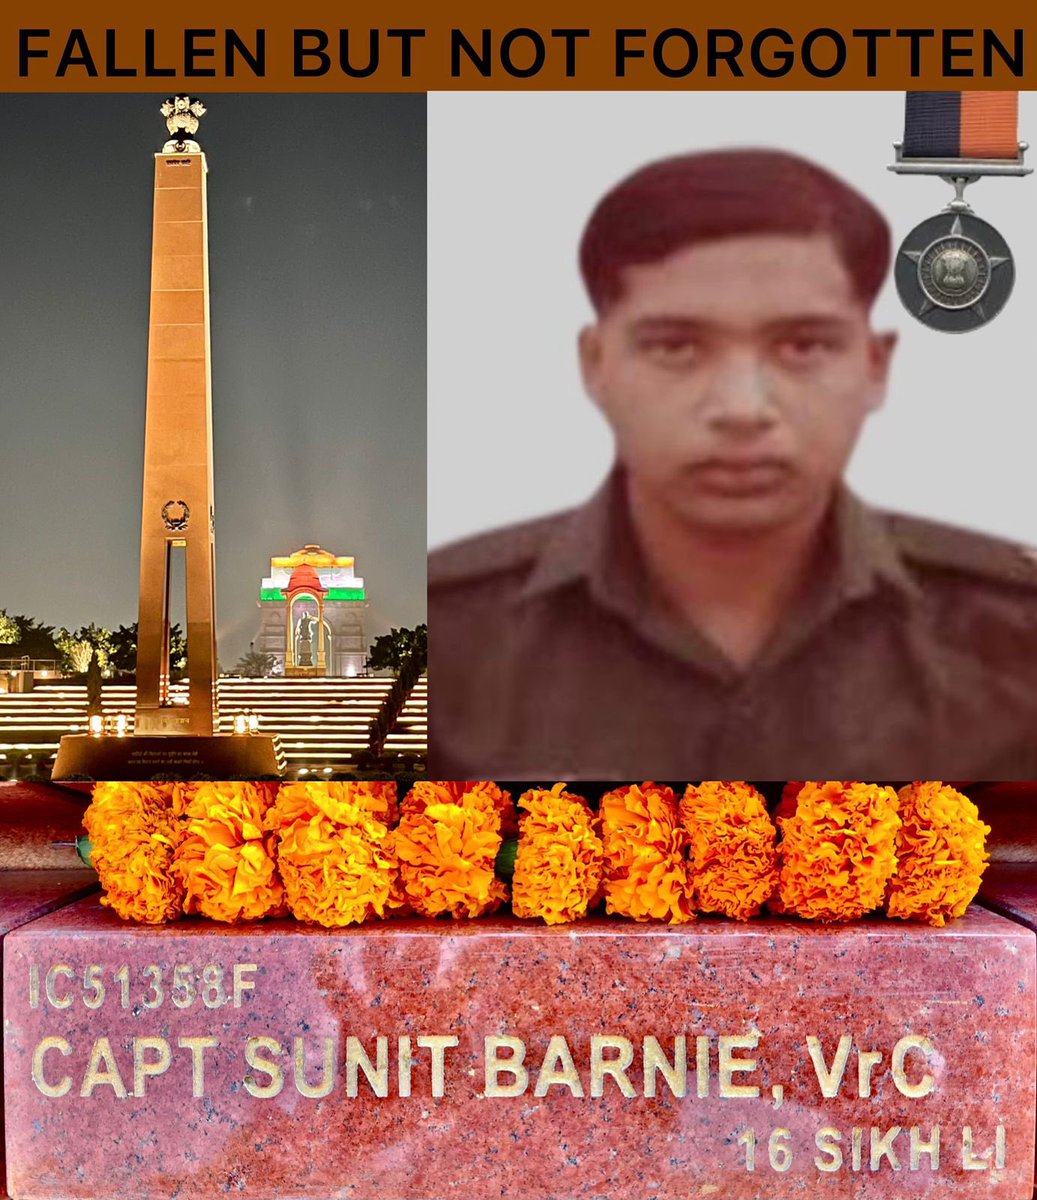 With #marigolds adorning the tablet of Capt Sunit Barnie, VrC (P), on the #Honour Wall, we remember & honour the supreme sacrifice of the valiant officer who became immortal #onthisday while engaged in combat with the enemy at Mirpur Post in Tangdhar Sector. #LestWeForget.